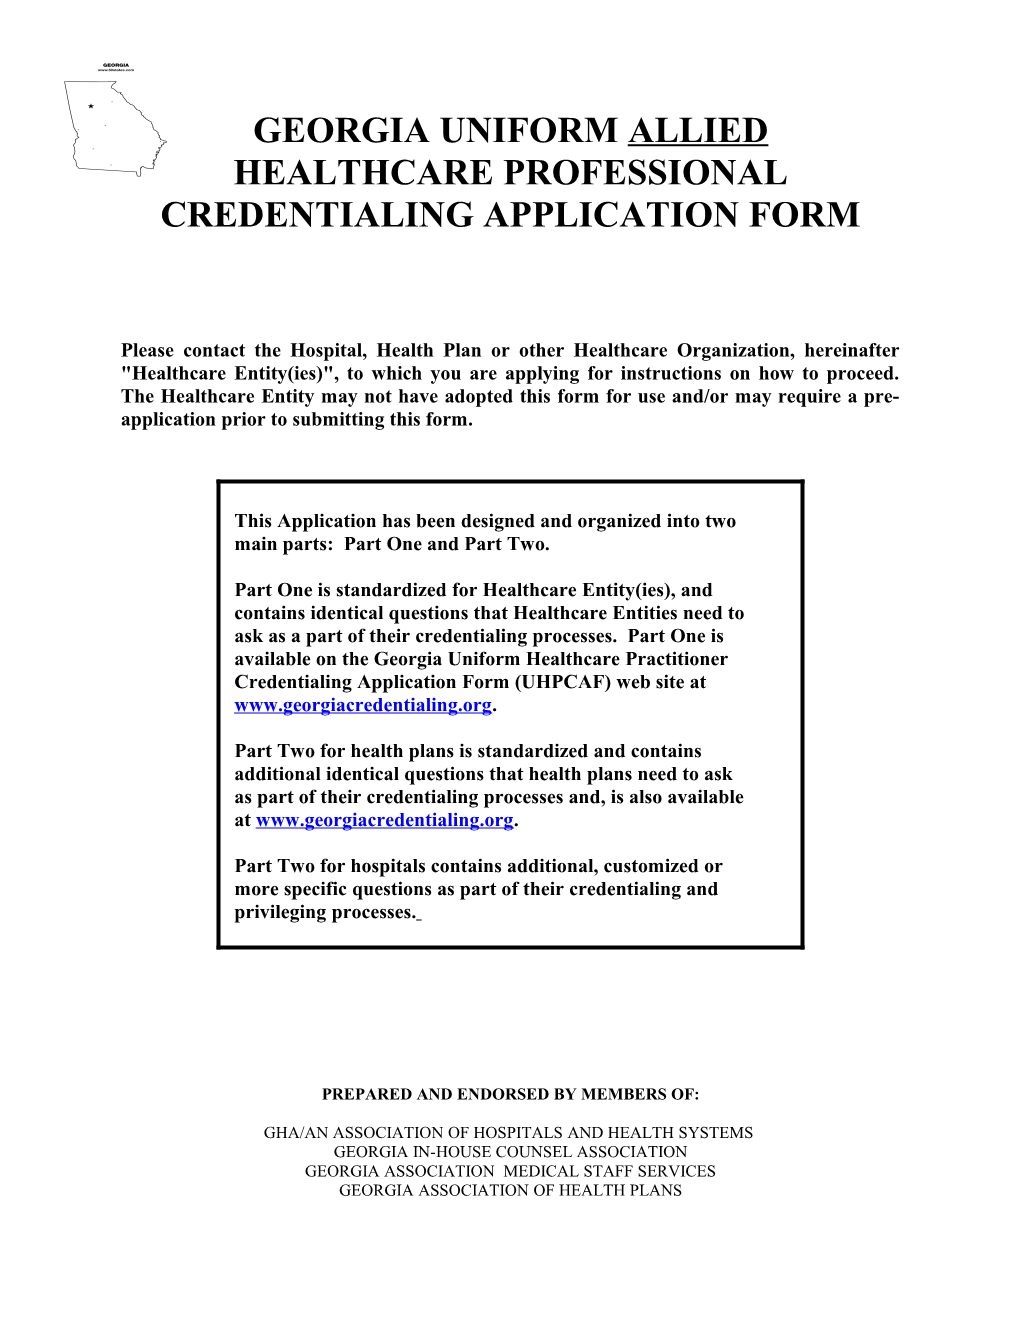 Georgia Uniform Allied Healthcare Professional Credentialing Application Form